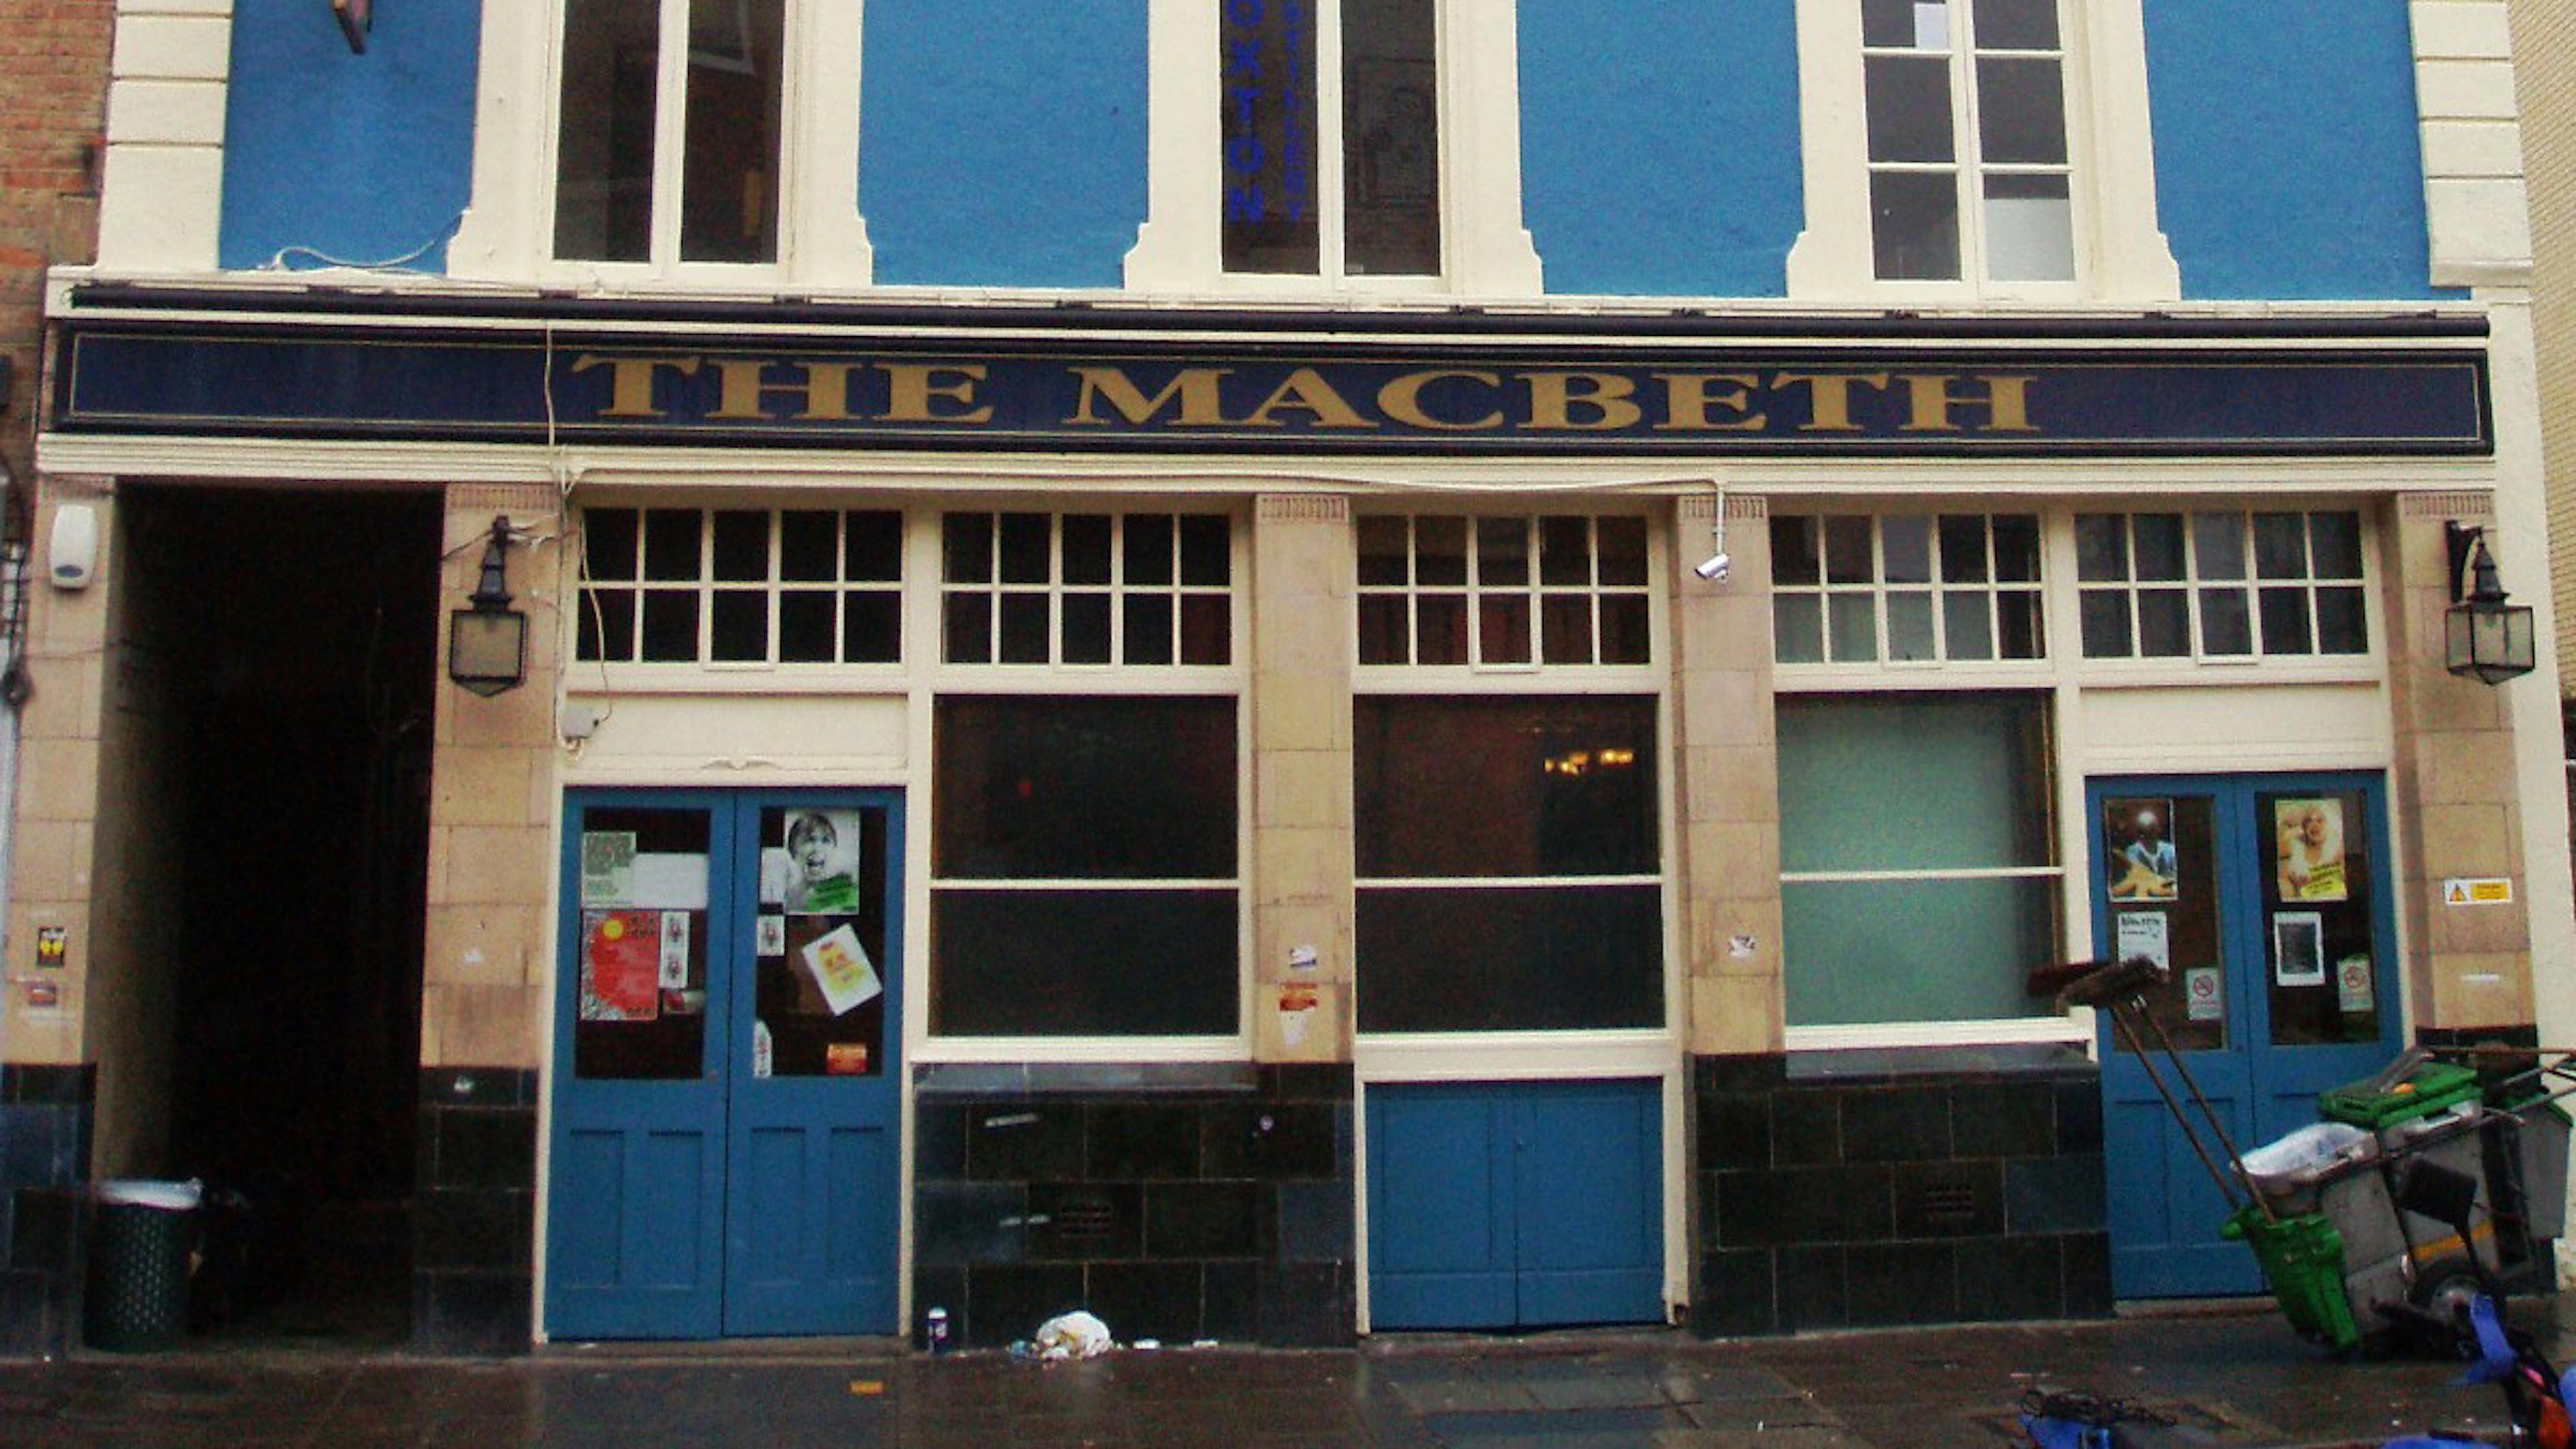 London's Macbeth Venue Is Under Threat From Closure – And Needs Your Help